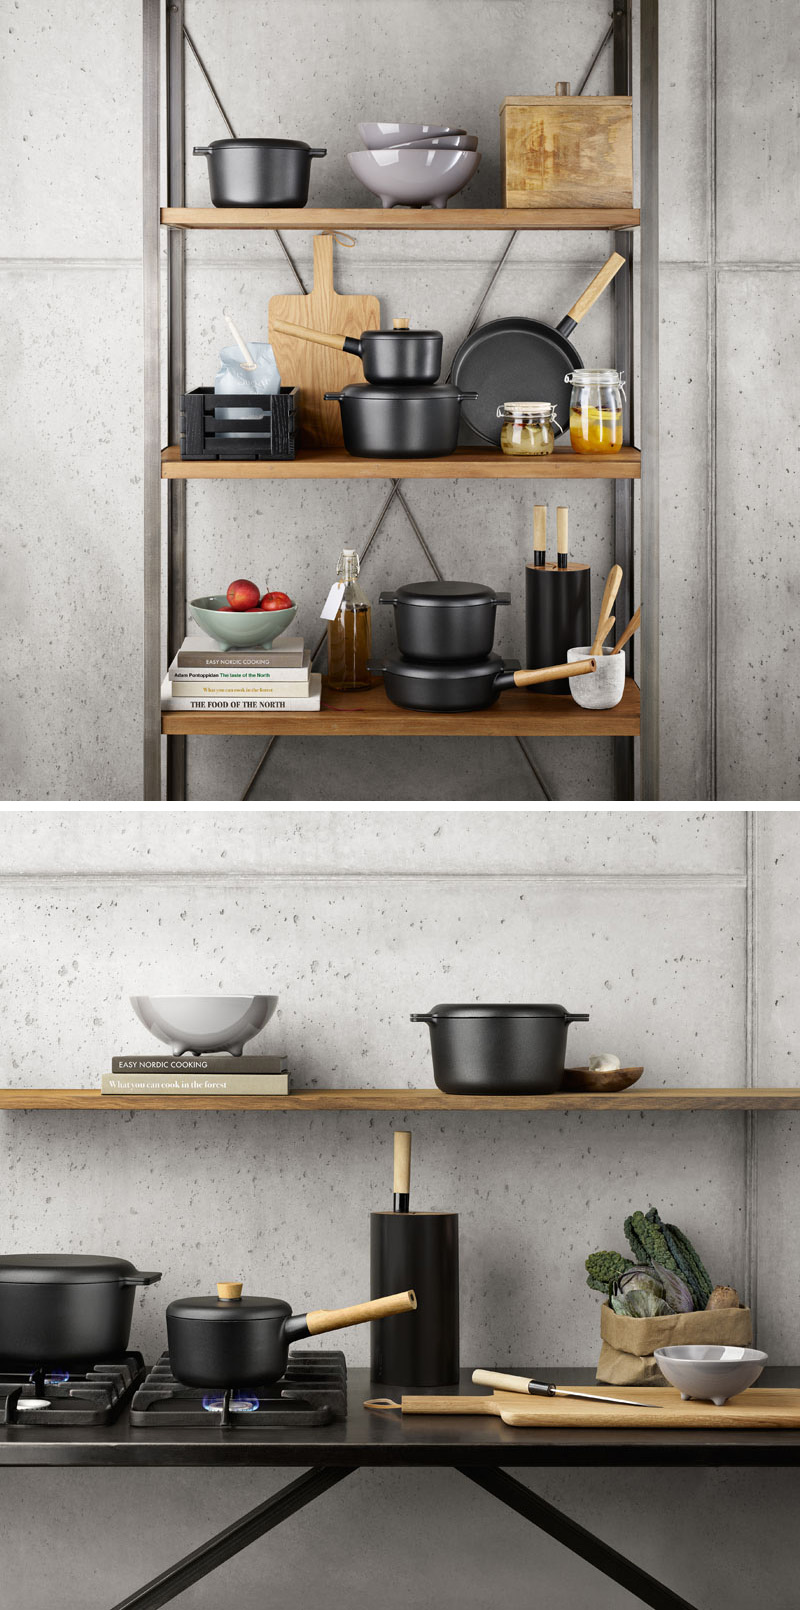 Matte black pots and pans with wood accents on the handles and lids, add a natural touch to this kitchen and contribute to the overall modern look